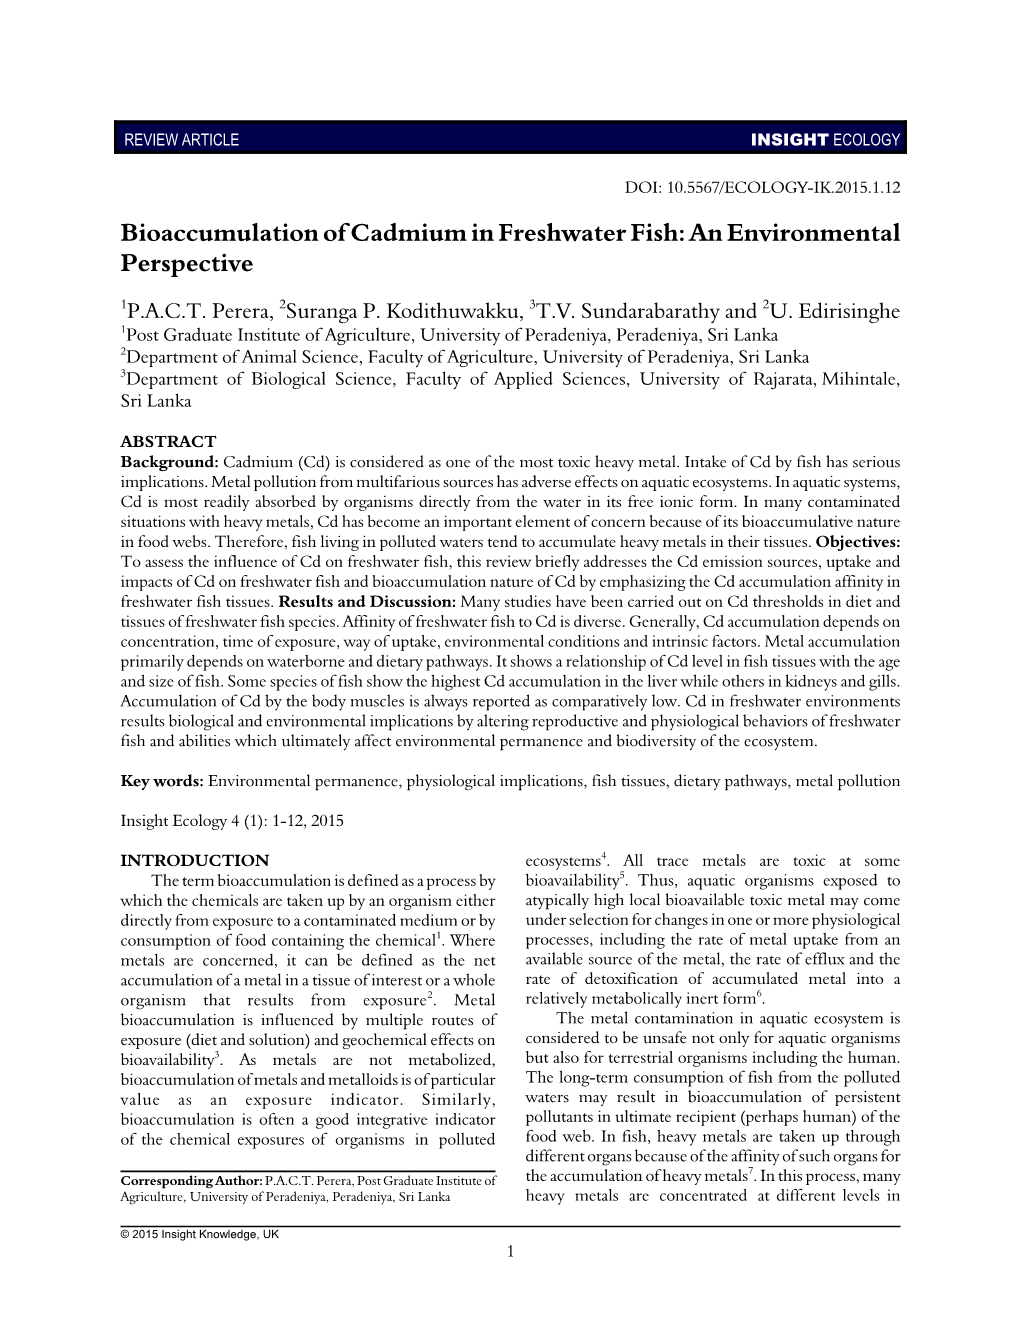 Bioaccumulation of Cadmium in Freshwater Fish: an Environmental Perspective